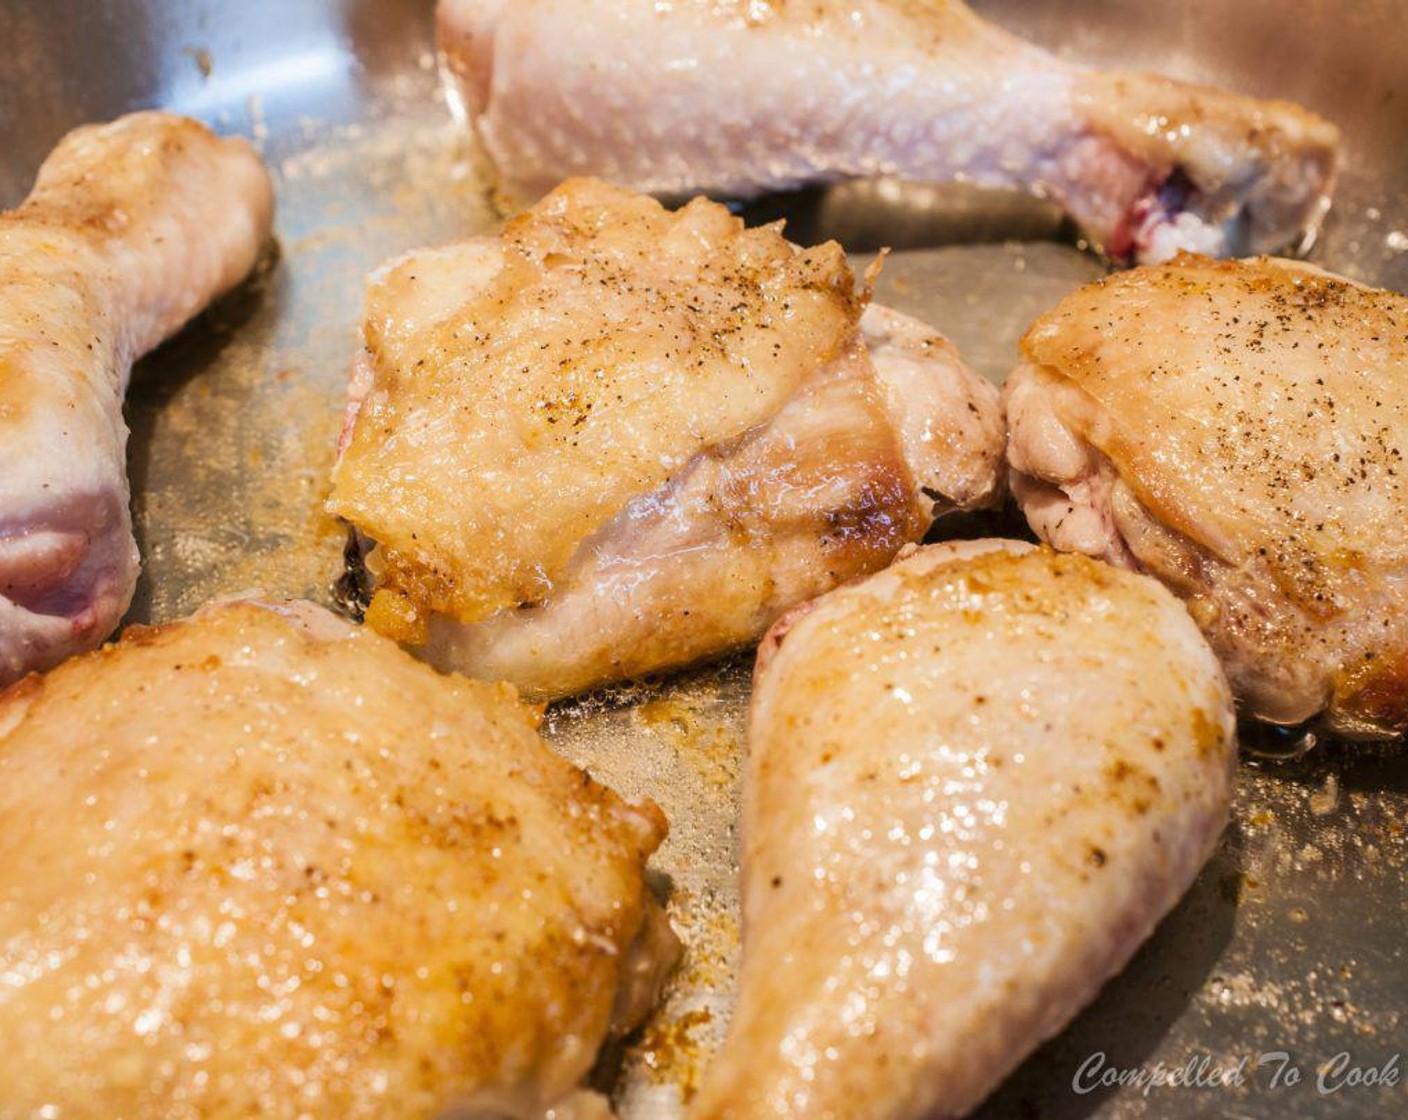 step 4 Once hot add chicken pieces and sear on all sides until nicely browned, approximately 12 minutes. Remove chicken and cover with foil. Remove all but 2 tablespoon of oil from skillet.